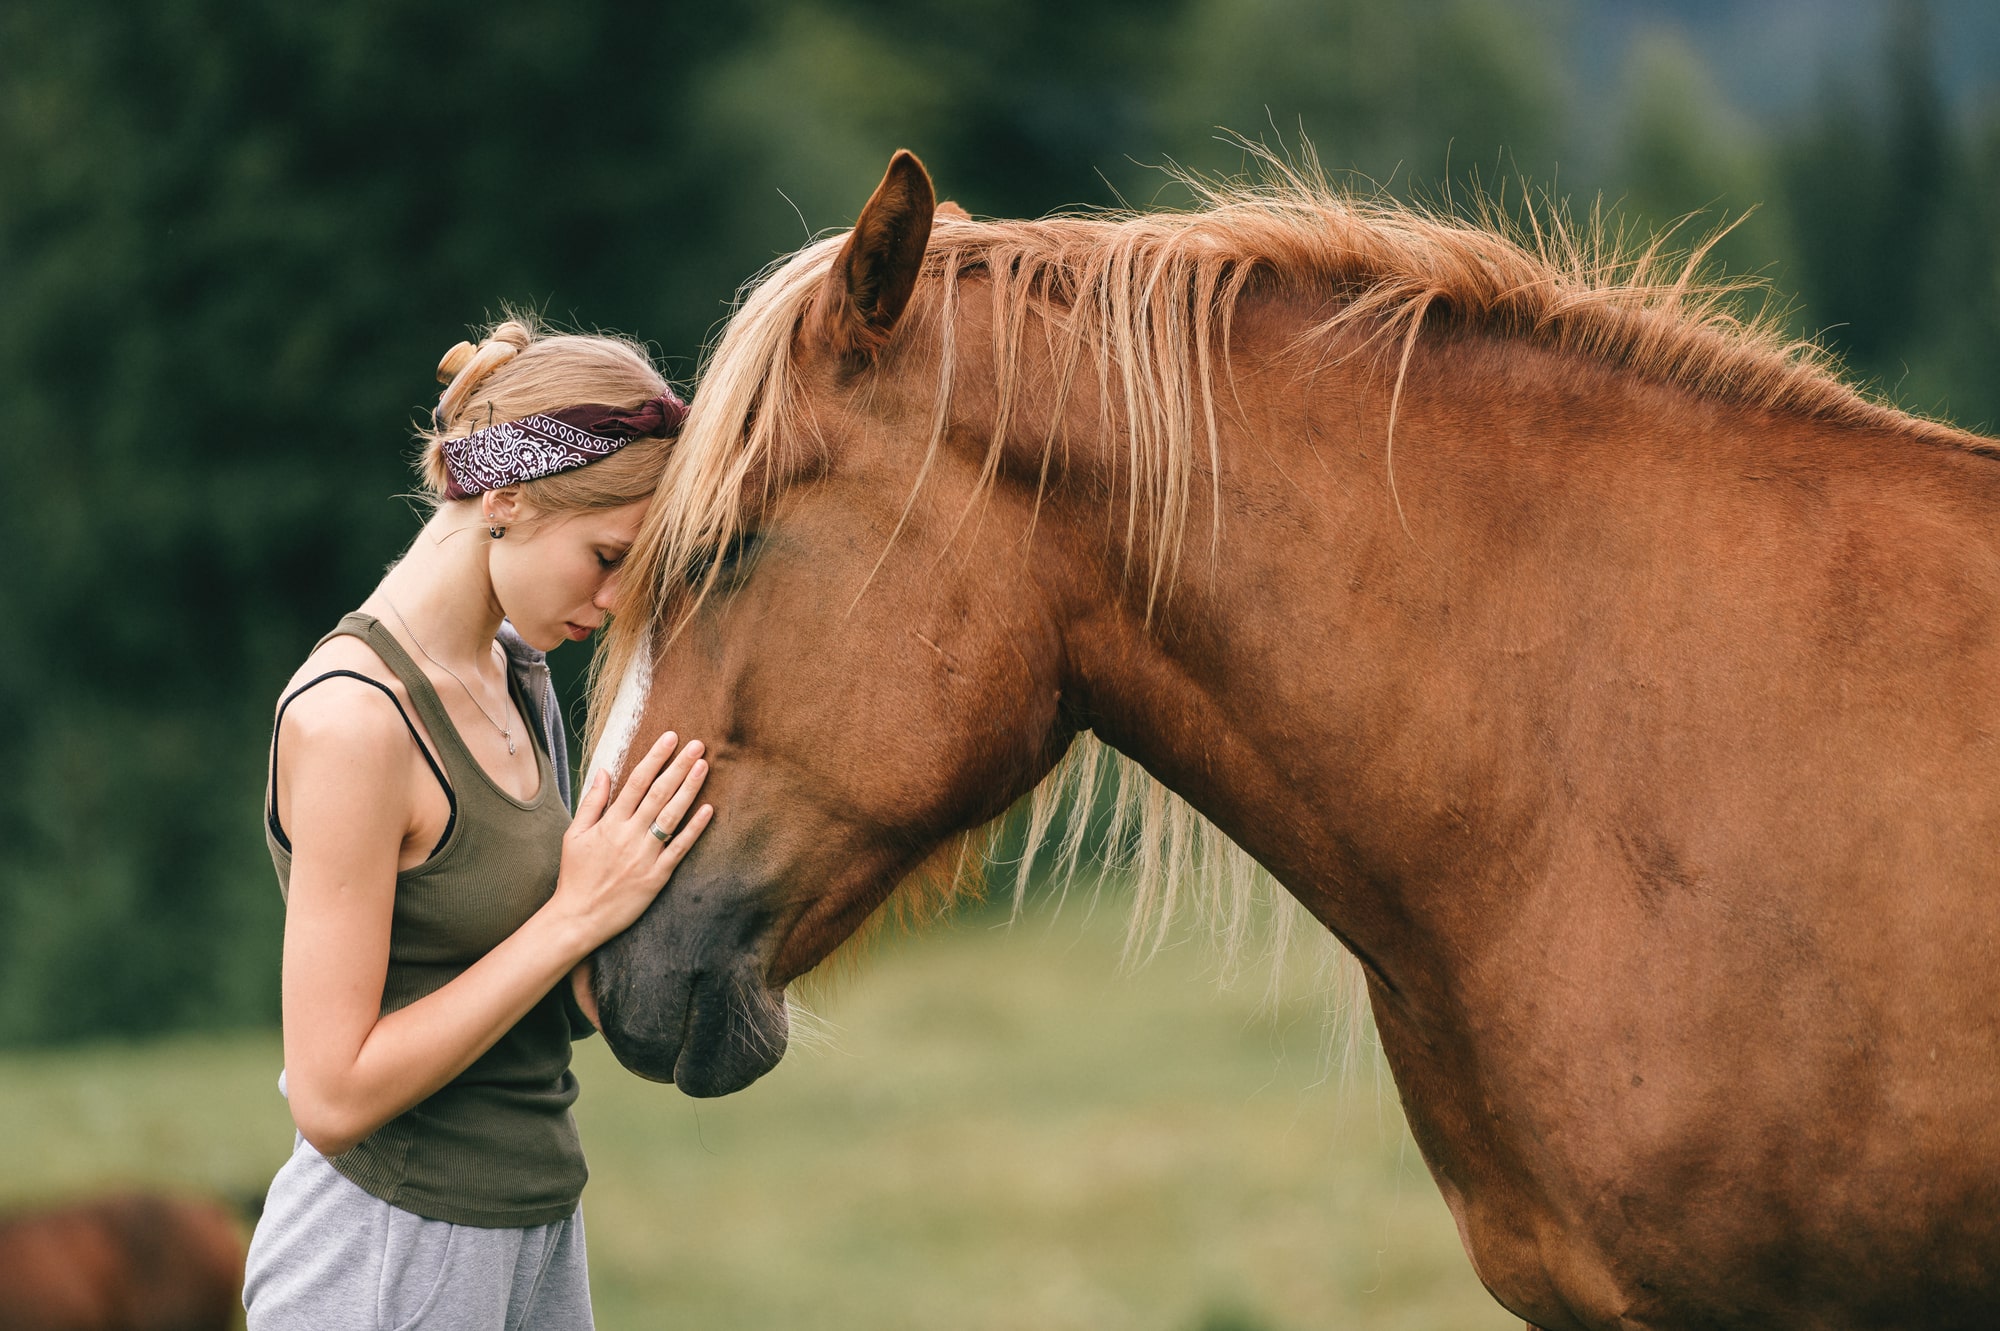 How Equine Therapy Helps Those Struggling With Addictions